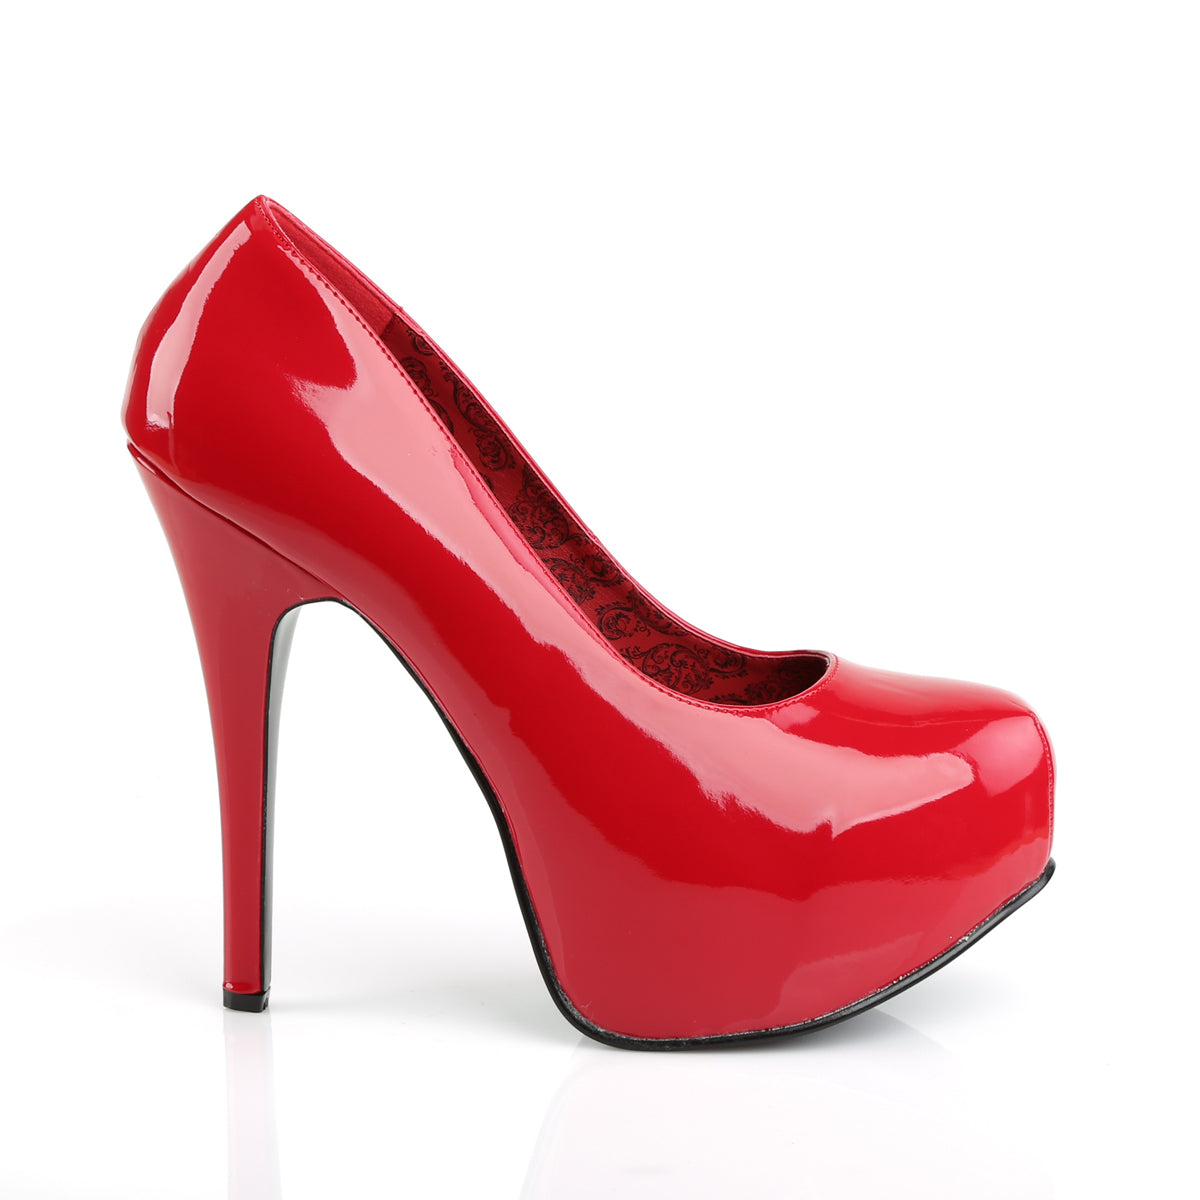 TEEZE-06W Pleaser Pink Label 6 Inch Heel Red Platform Shoes-Pleaser Pink Label- Large Size Ladies Shoes